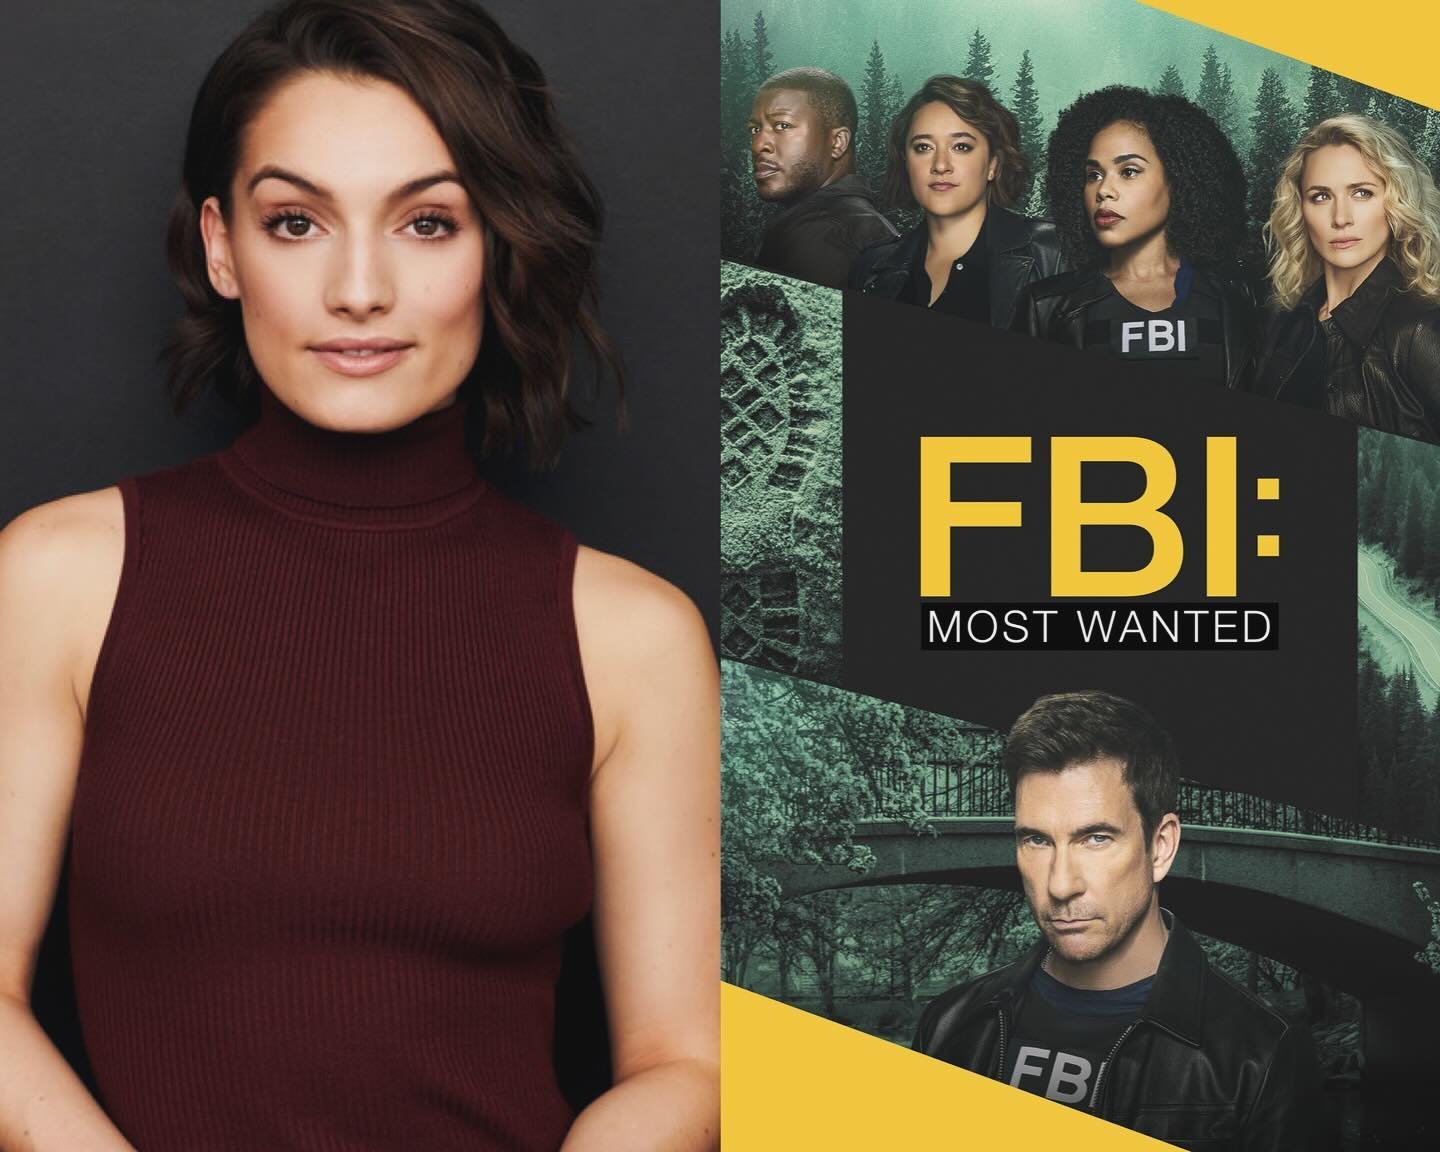 Don&rsquo;t miss @sydcskye on tonight&rsquo;s episode of FBI: MOST WANTED! ⭐️